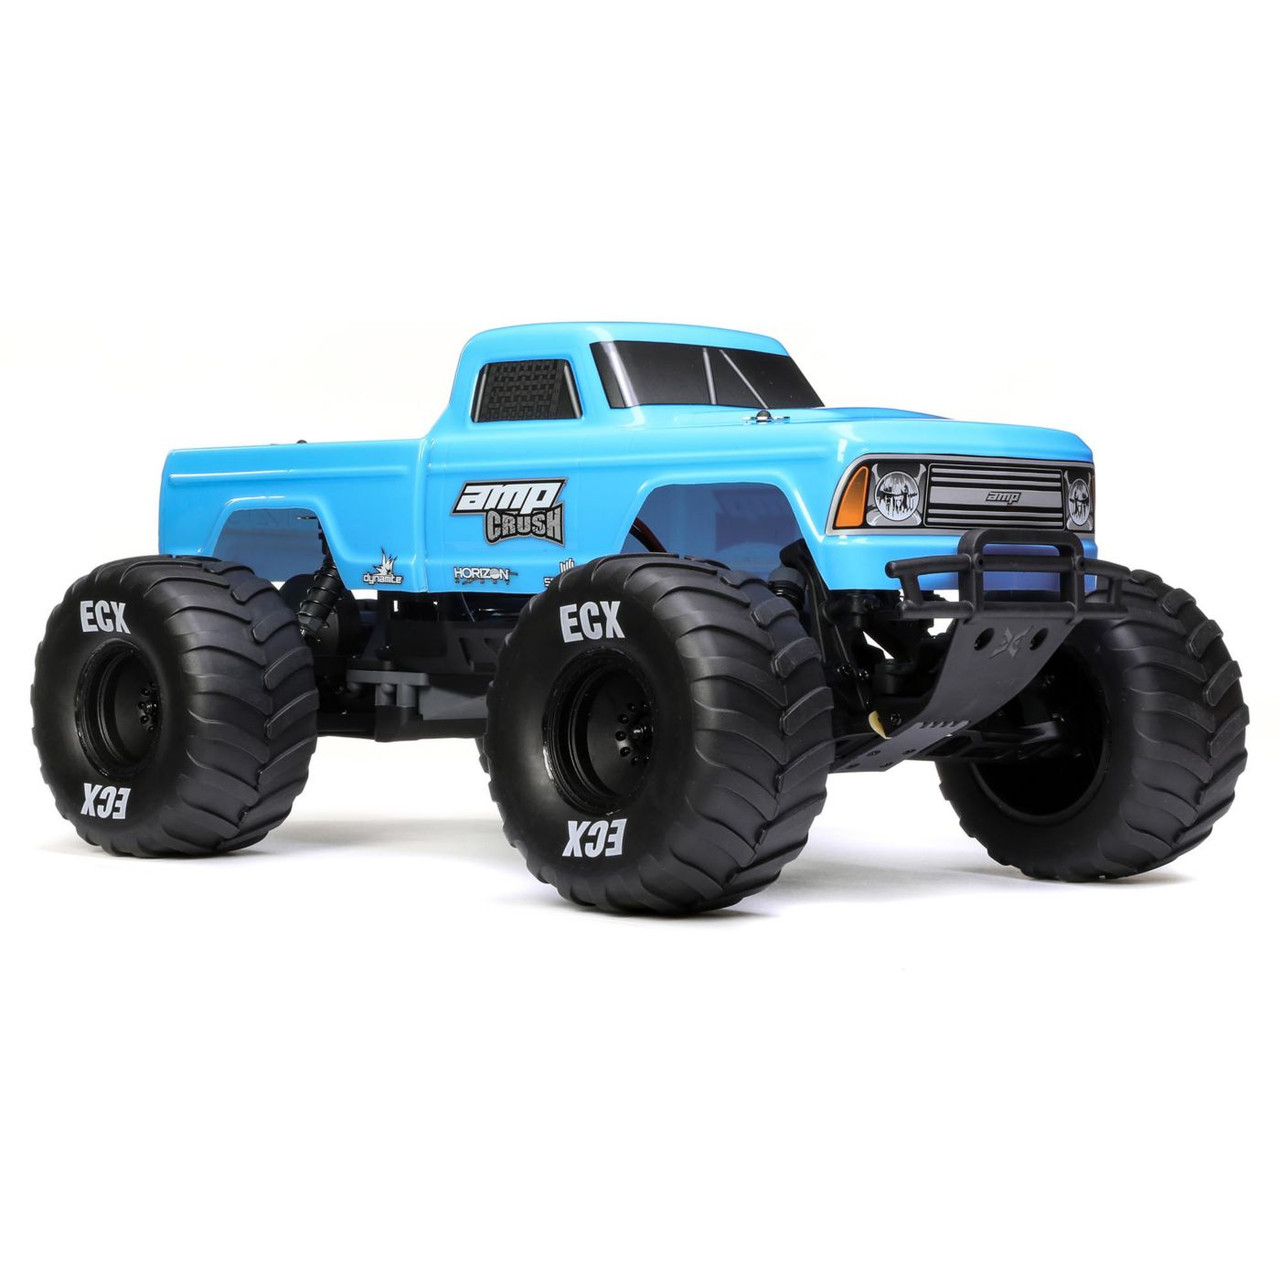 ECX 1/10 Amp Crush 2WD Monster Truck Brushed RTR (Blue)